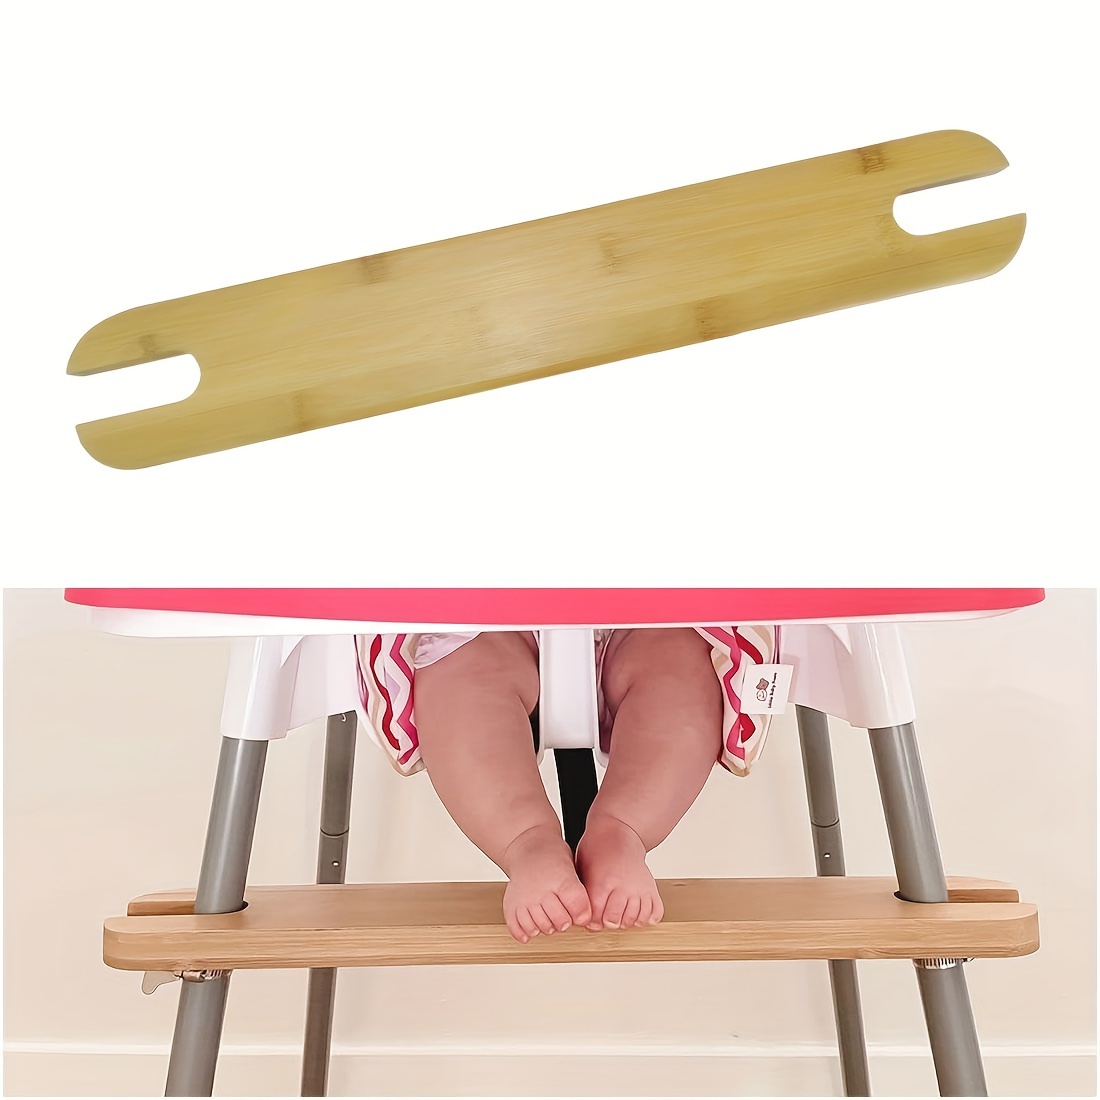 High Chair Footrest Accessories Foot Rest adjustable for High Chair